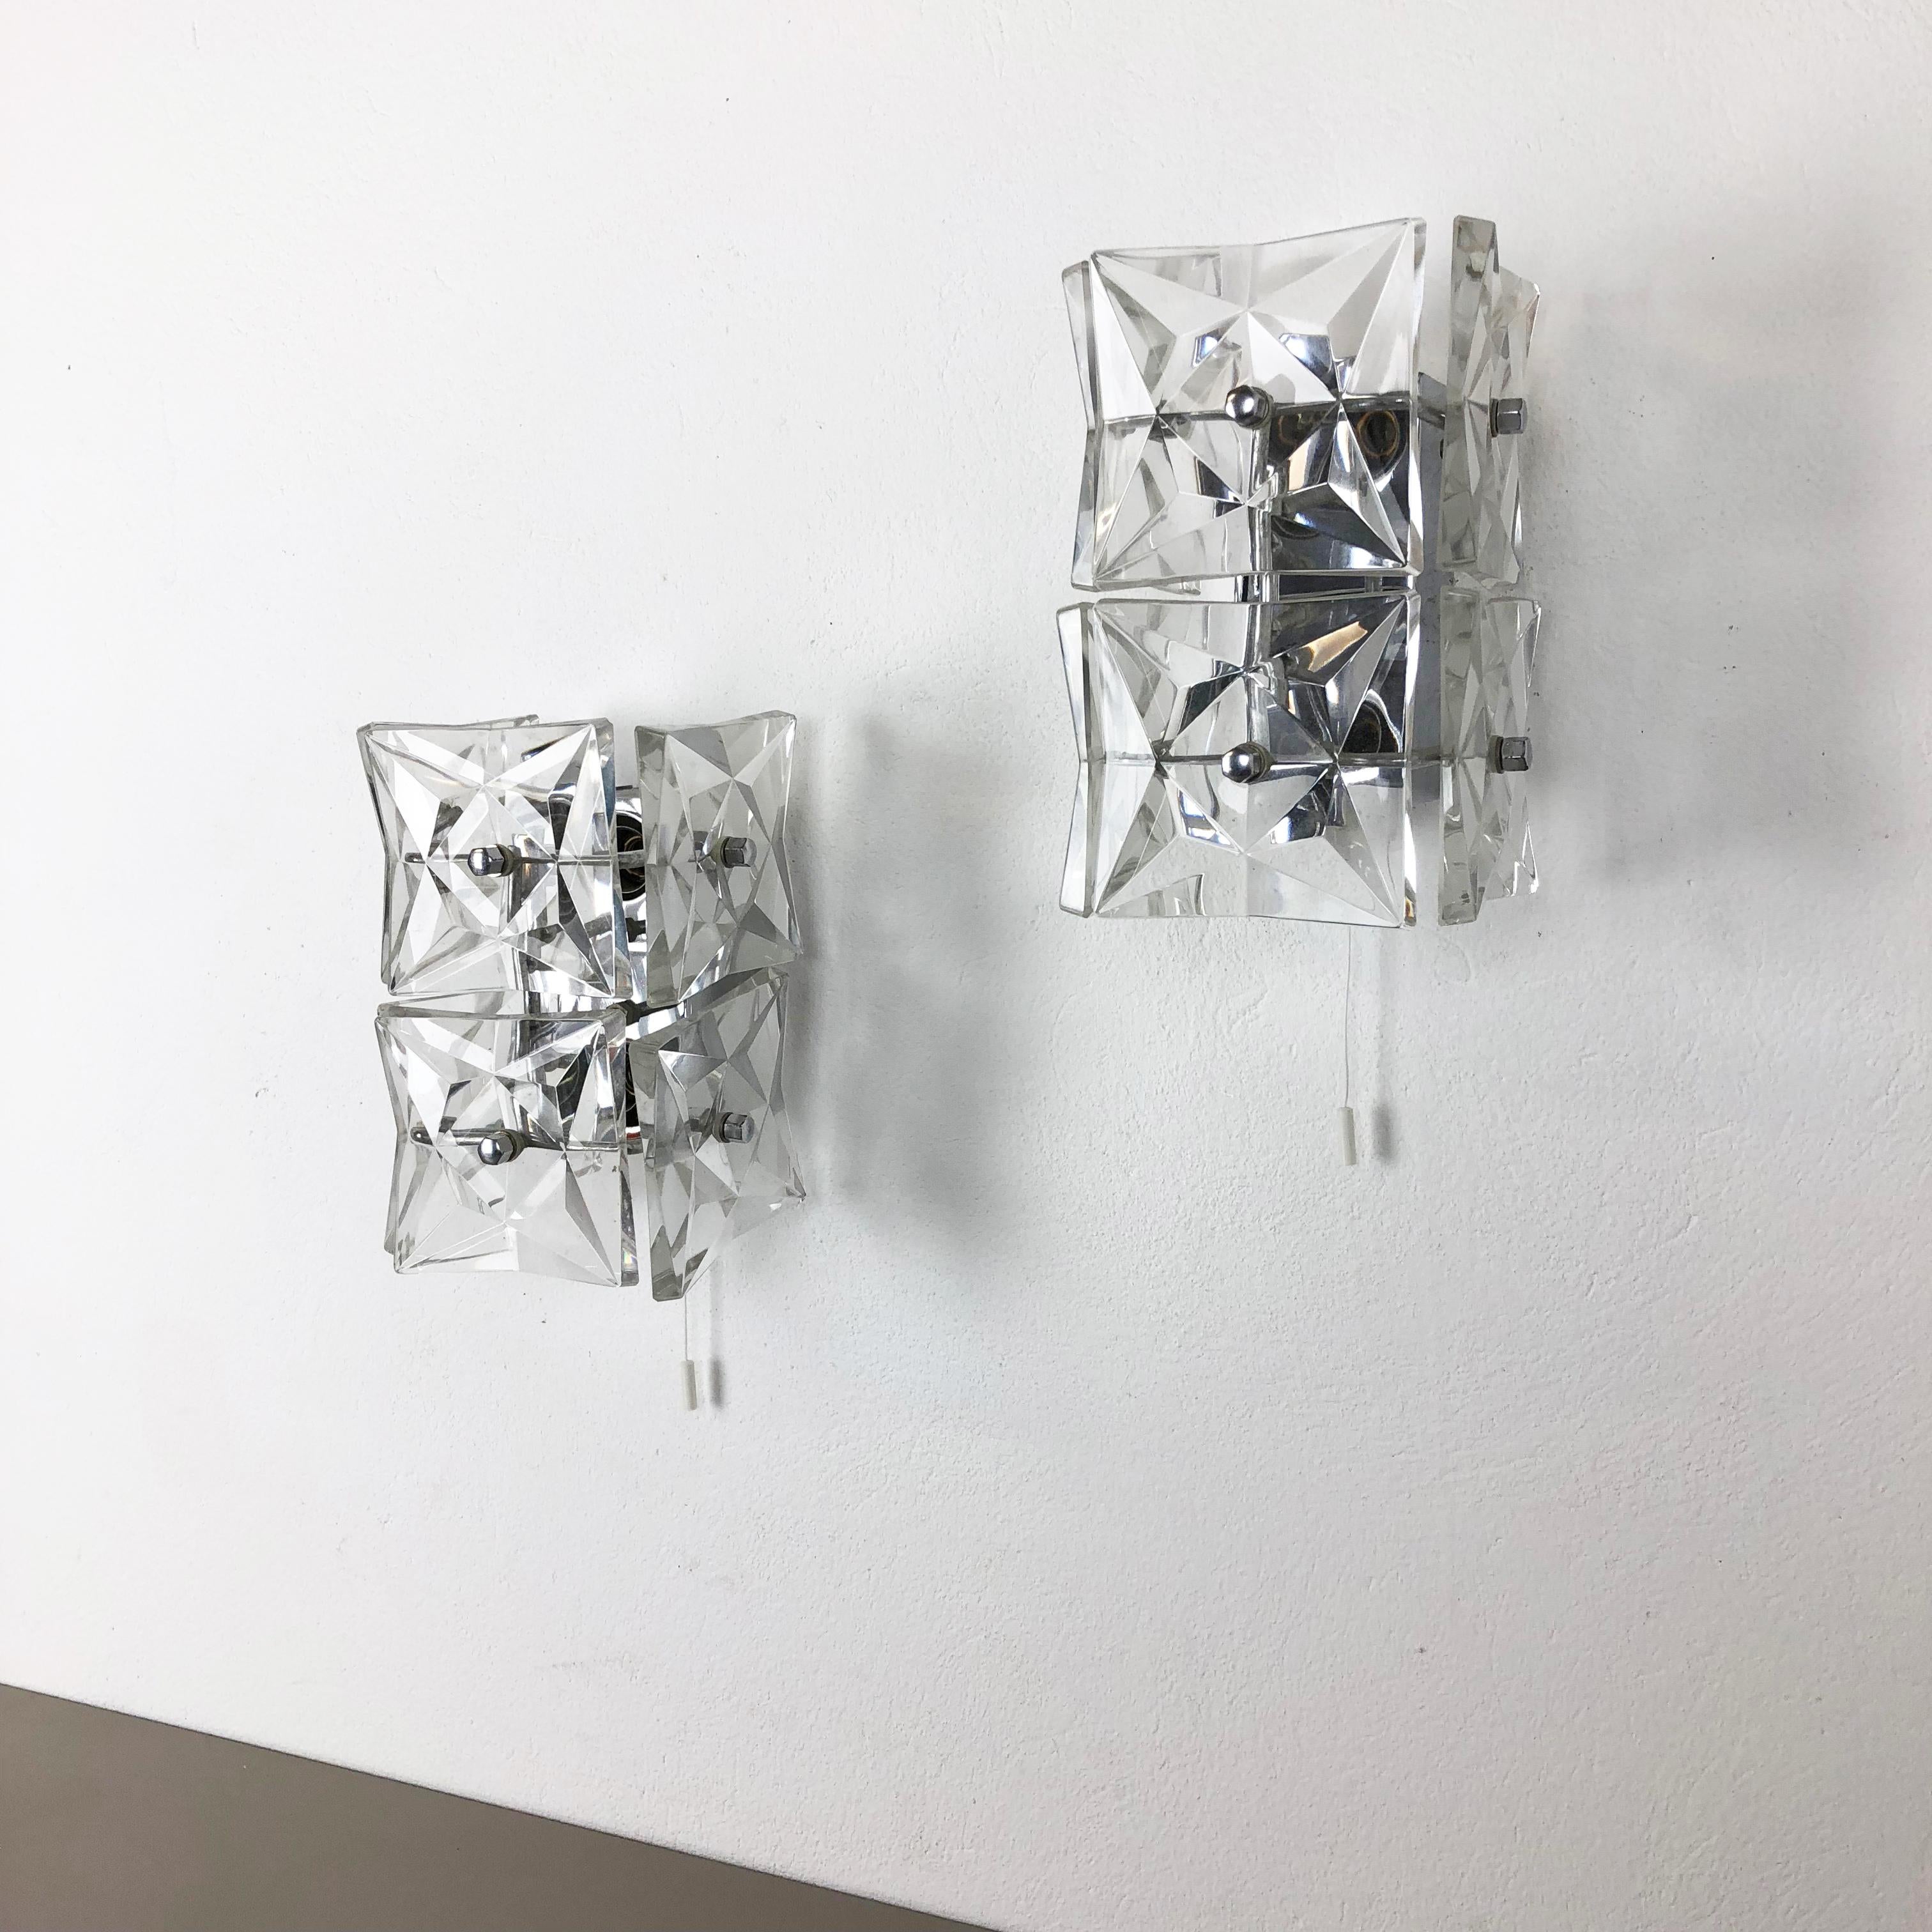 Article:

Set of 2

Wall light sconces


Origin:

Germany


Producer:

Kinkeldey, Germany



Age:

1960s



This set of 2 modernist lights was produced by Kinkeldey, Bad Pyrmont in Germany in the 1960s. It is made from heavy